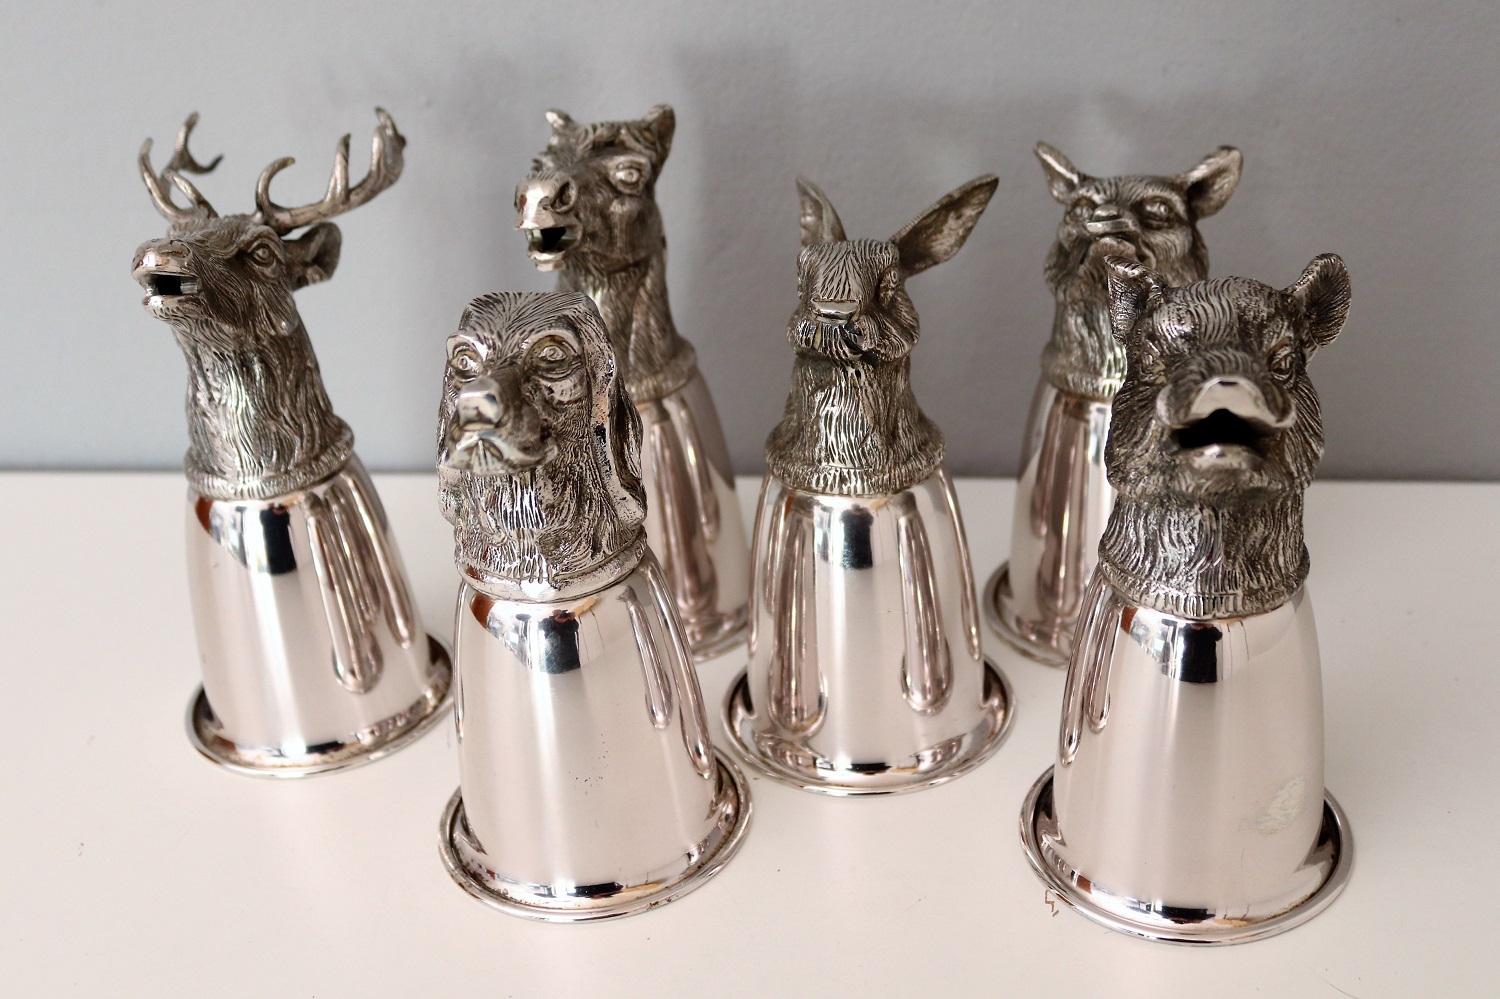 Italian Gucci Silver Plated Drinking Cups in Different Animal Shapes Signed 10